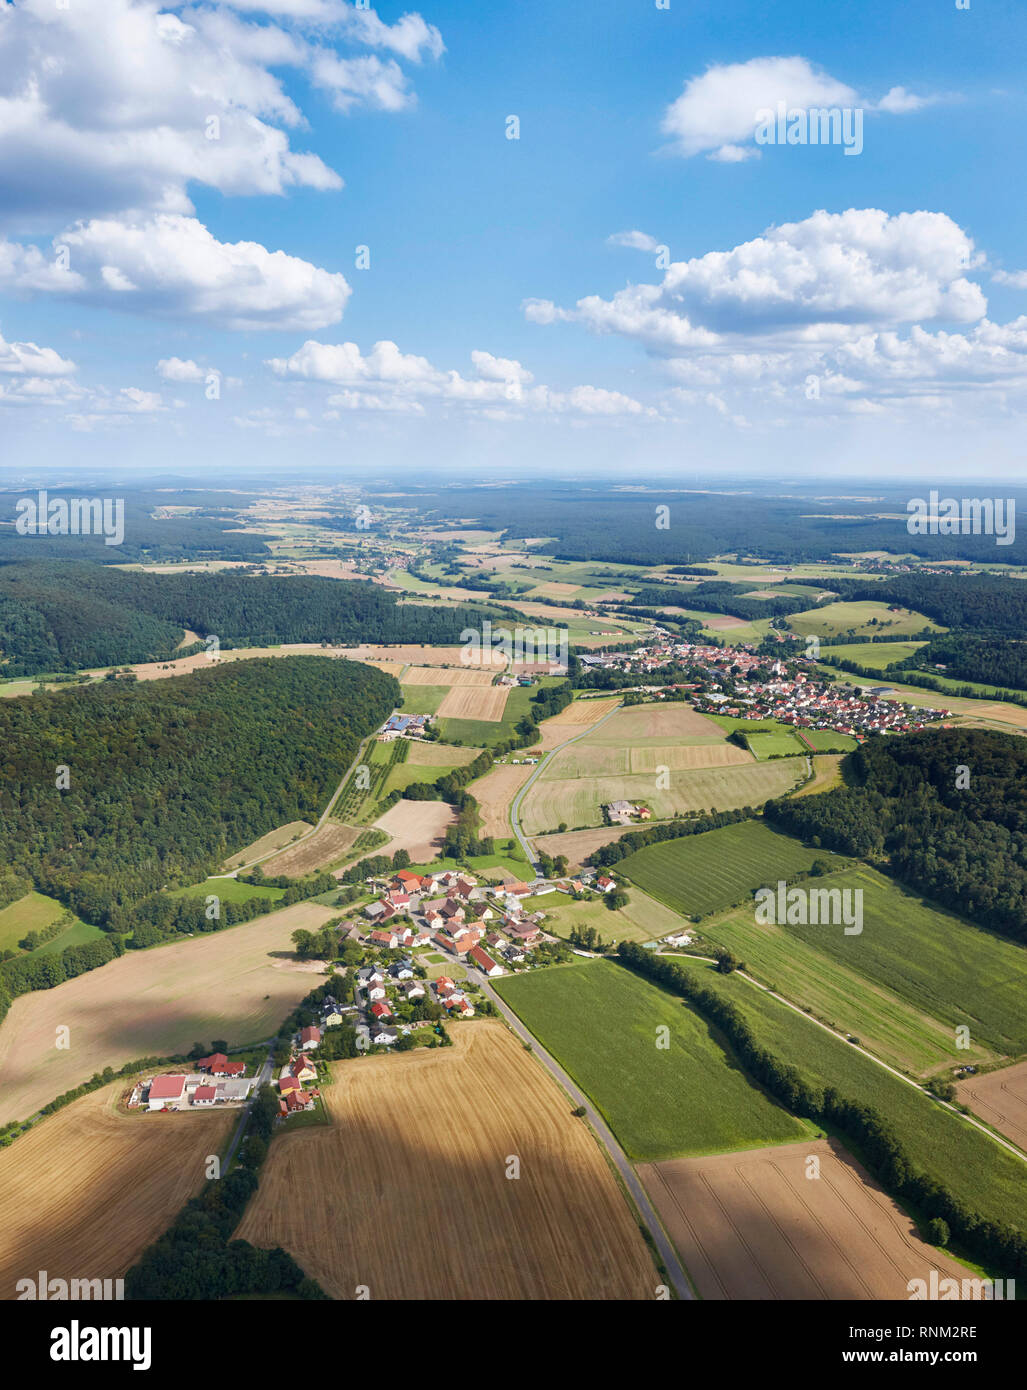 The town Obersteinbach seen from the air. Municipality Rauhenebrach, district of Hassberg, Bavaria, Germany Stock Photo